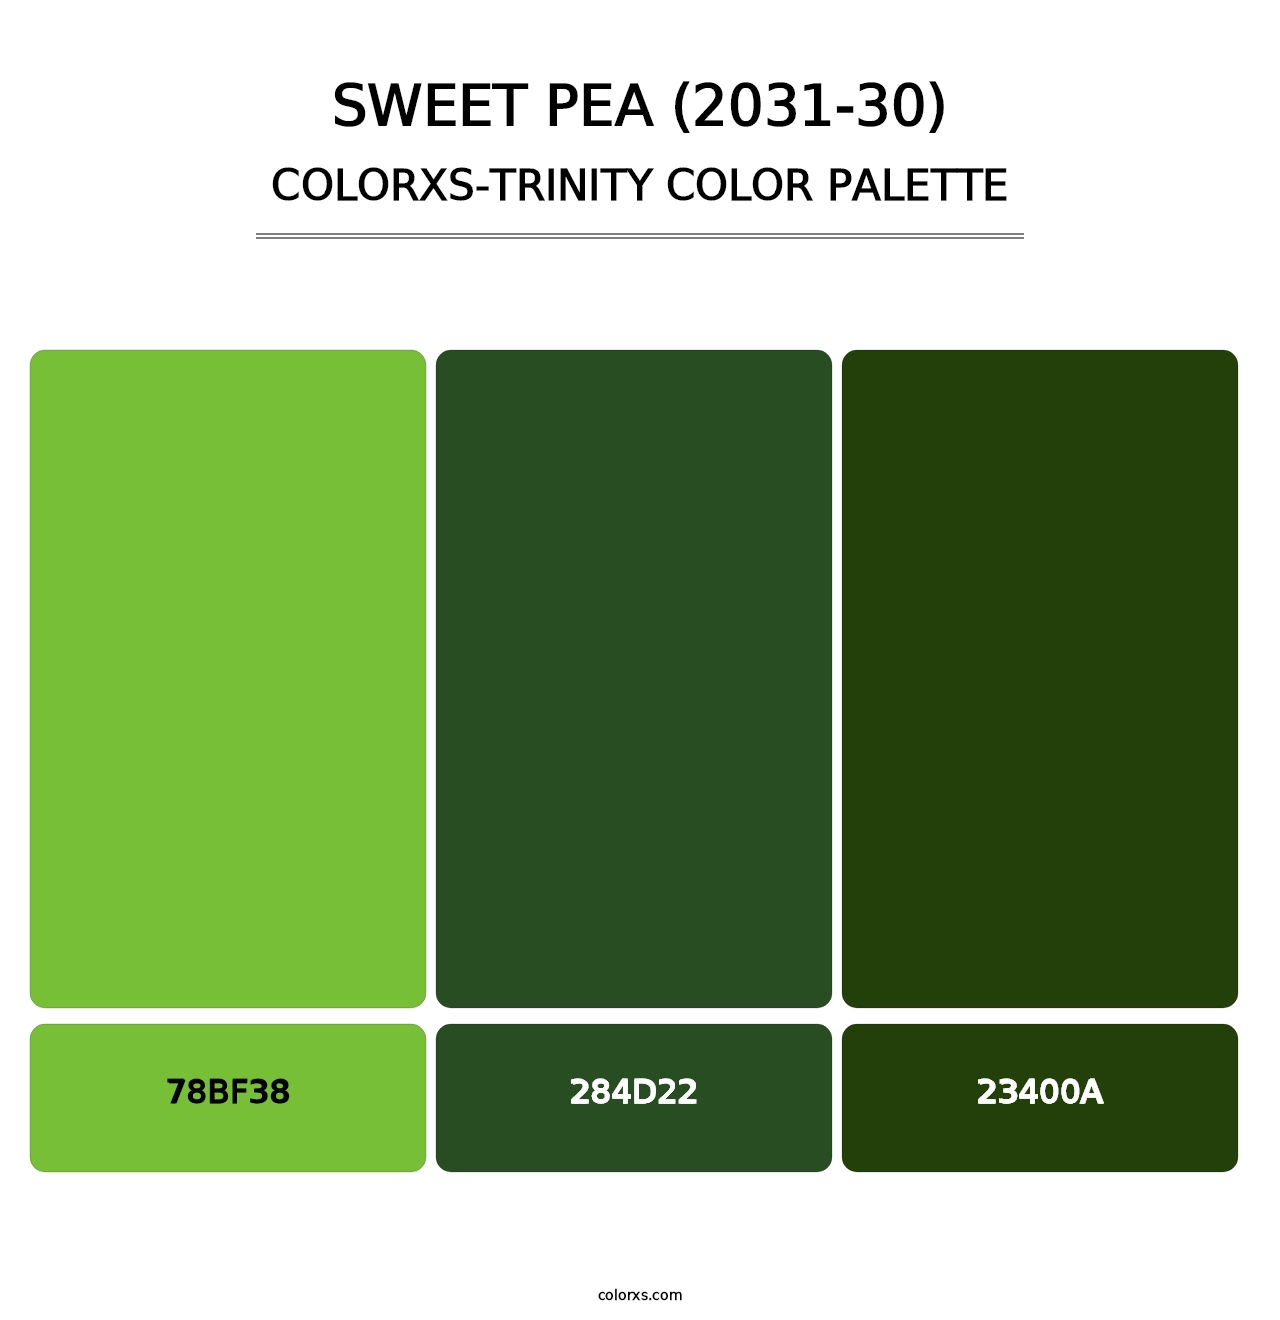 Sweet Pea (2031-30) - Colorxs Trinity Palette